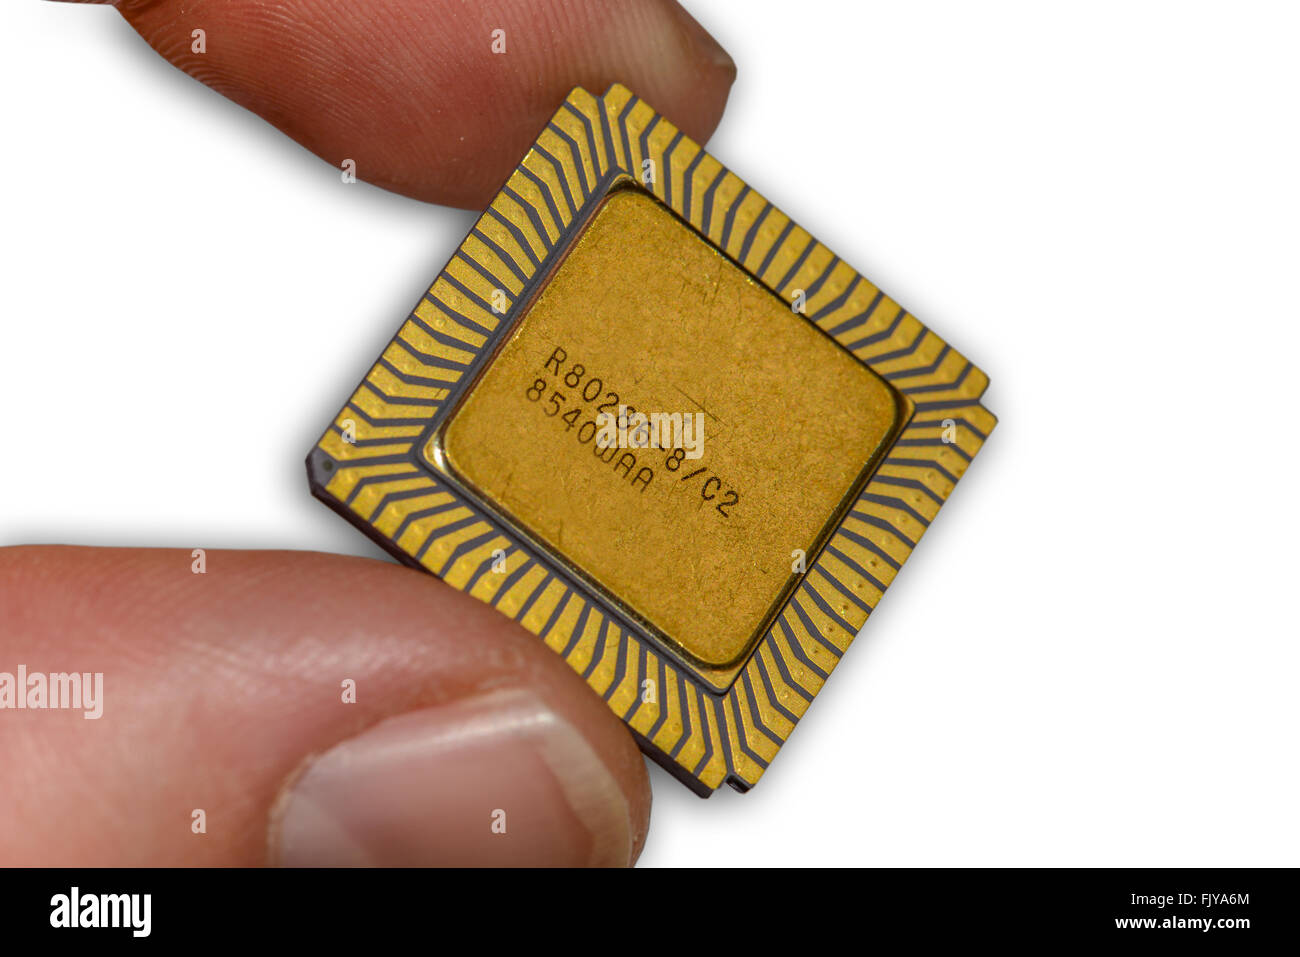 One vintage ceramic CPU between two fingers Stock Photo